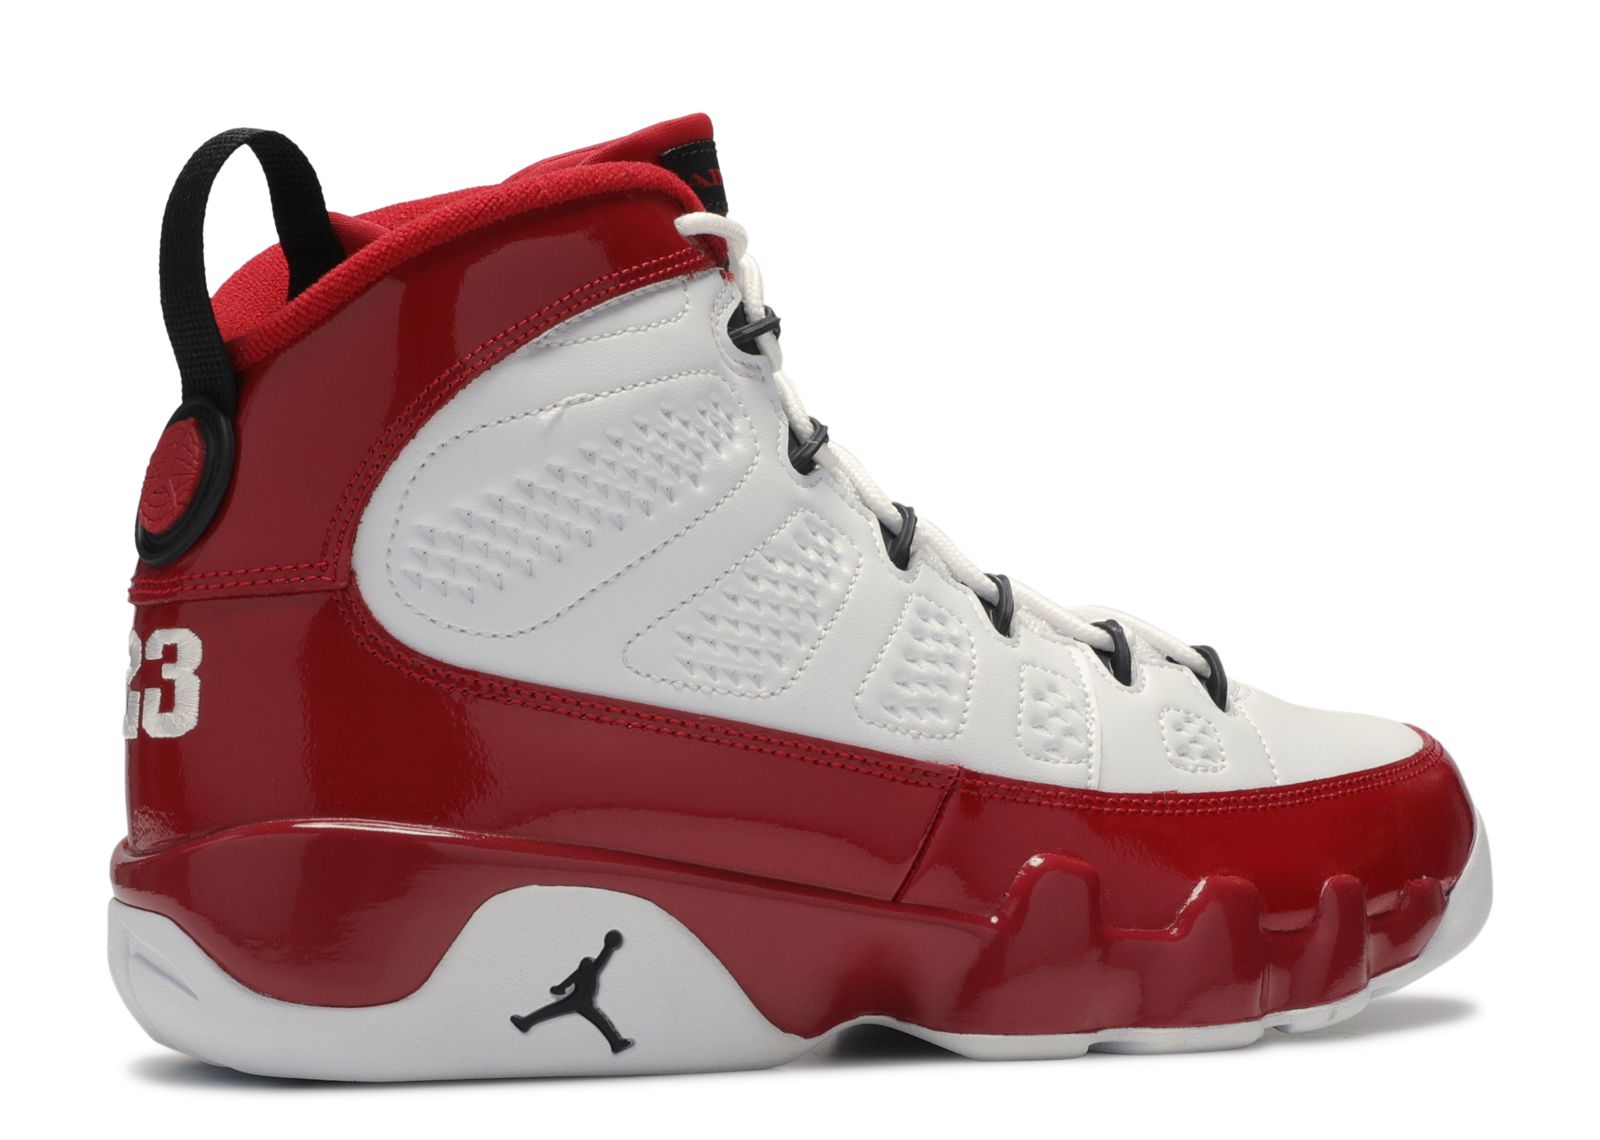 gym red 9s size 7